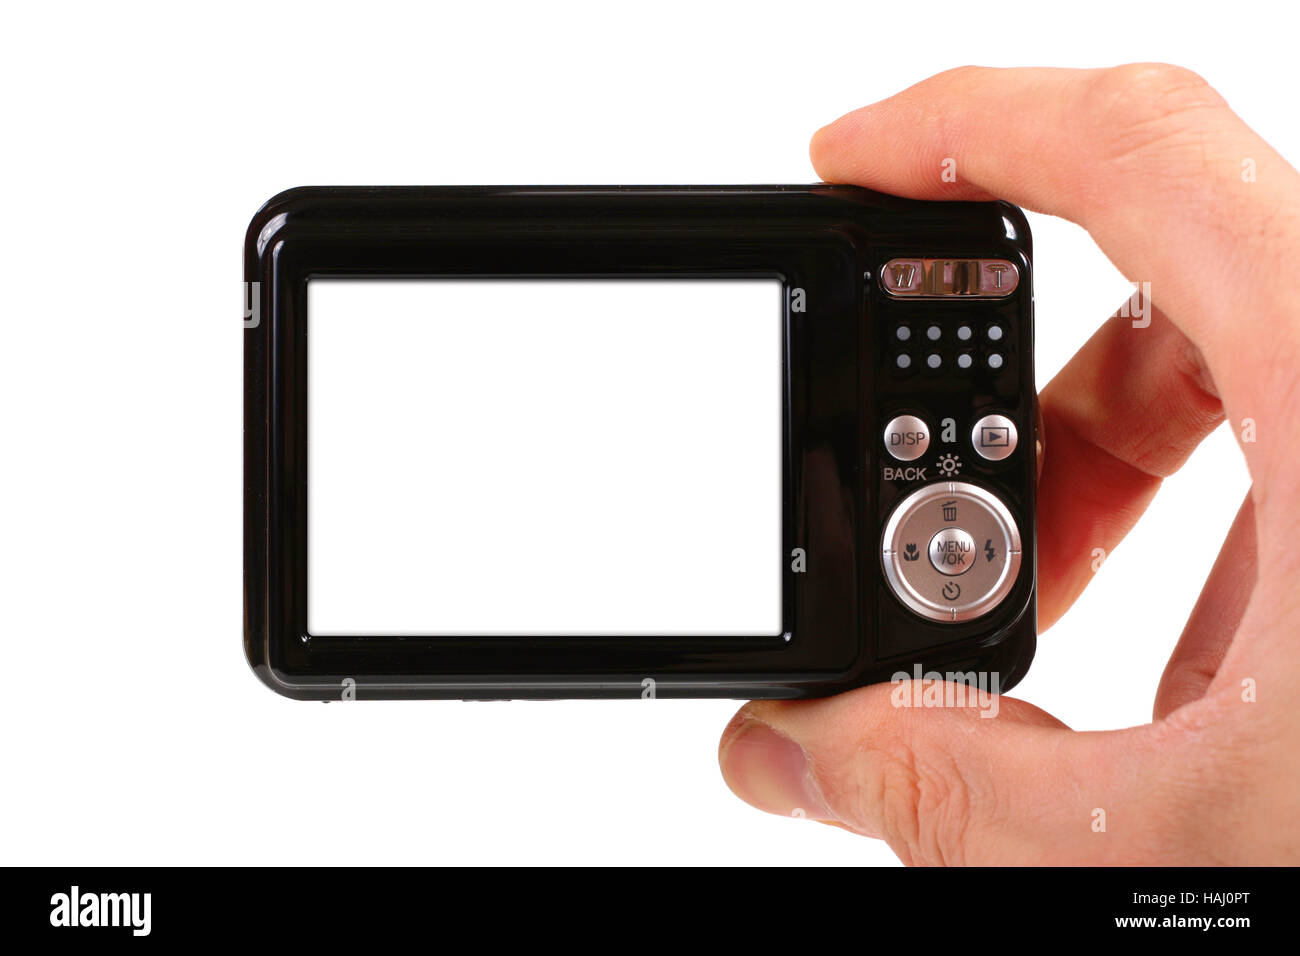 photo camera in hand isolated on white background Stock Photo